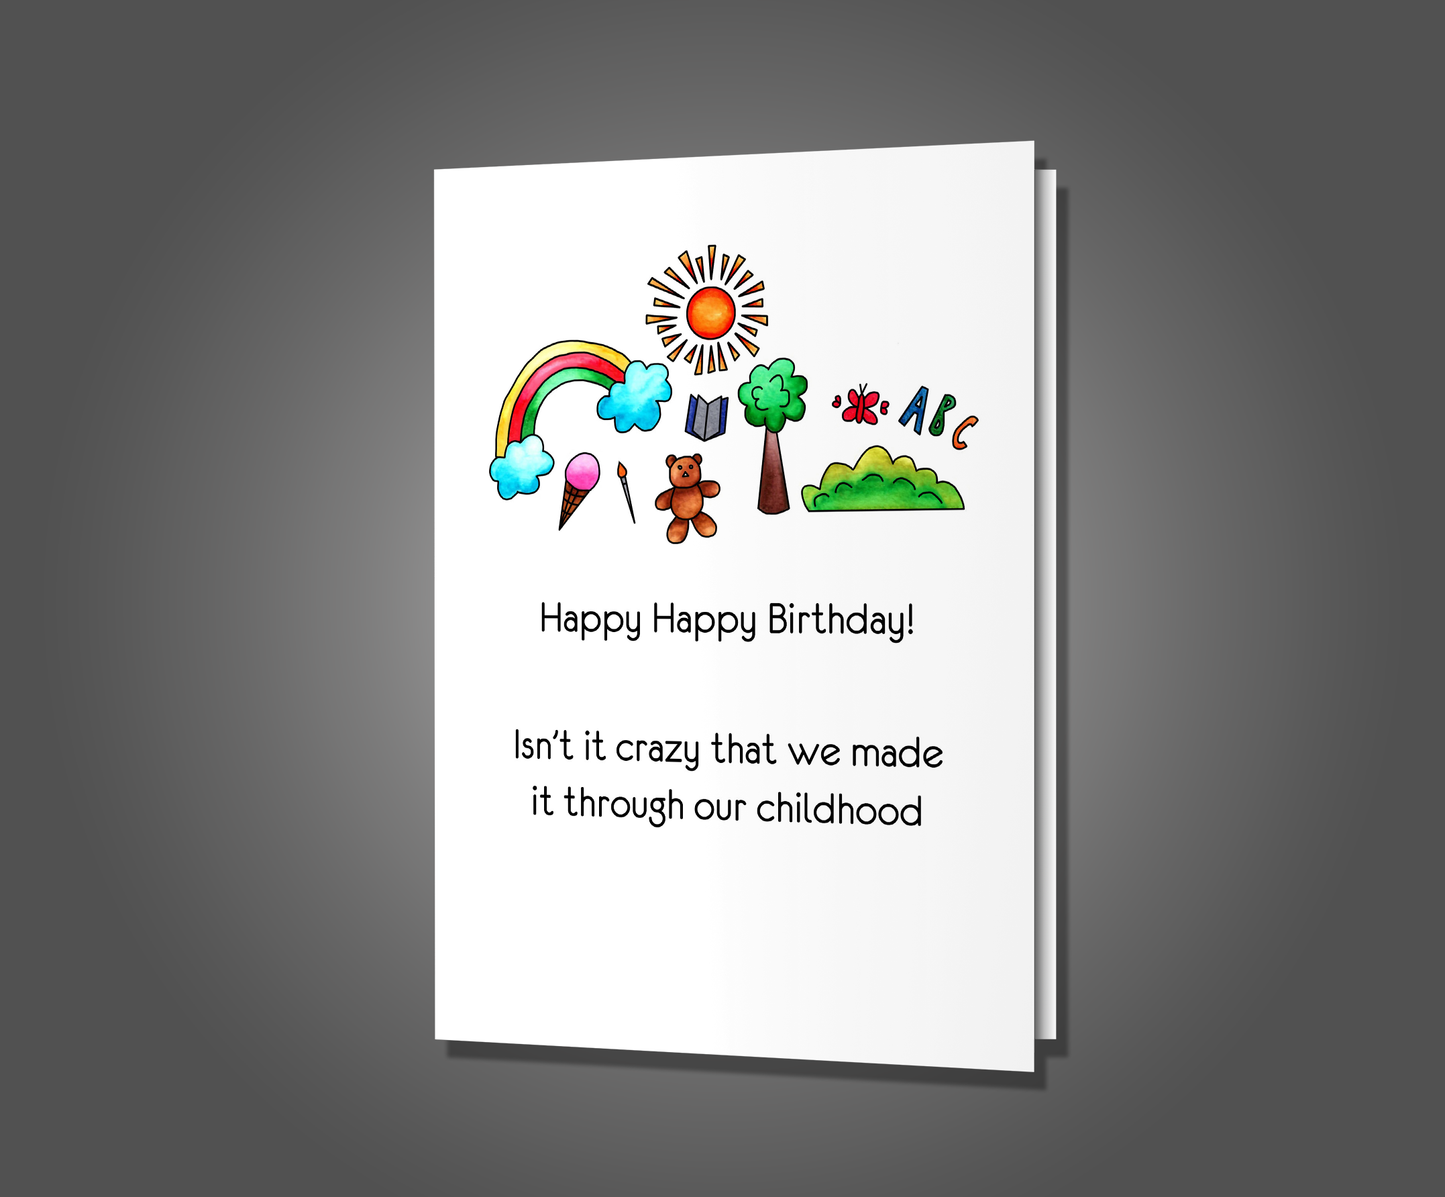 Dr. Phil, Sibling Birthday Card